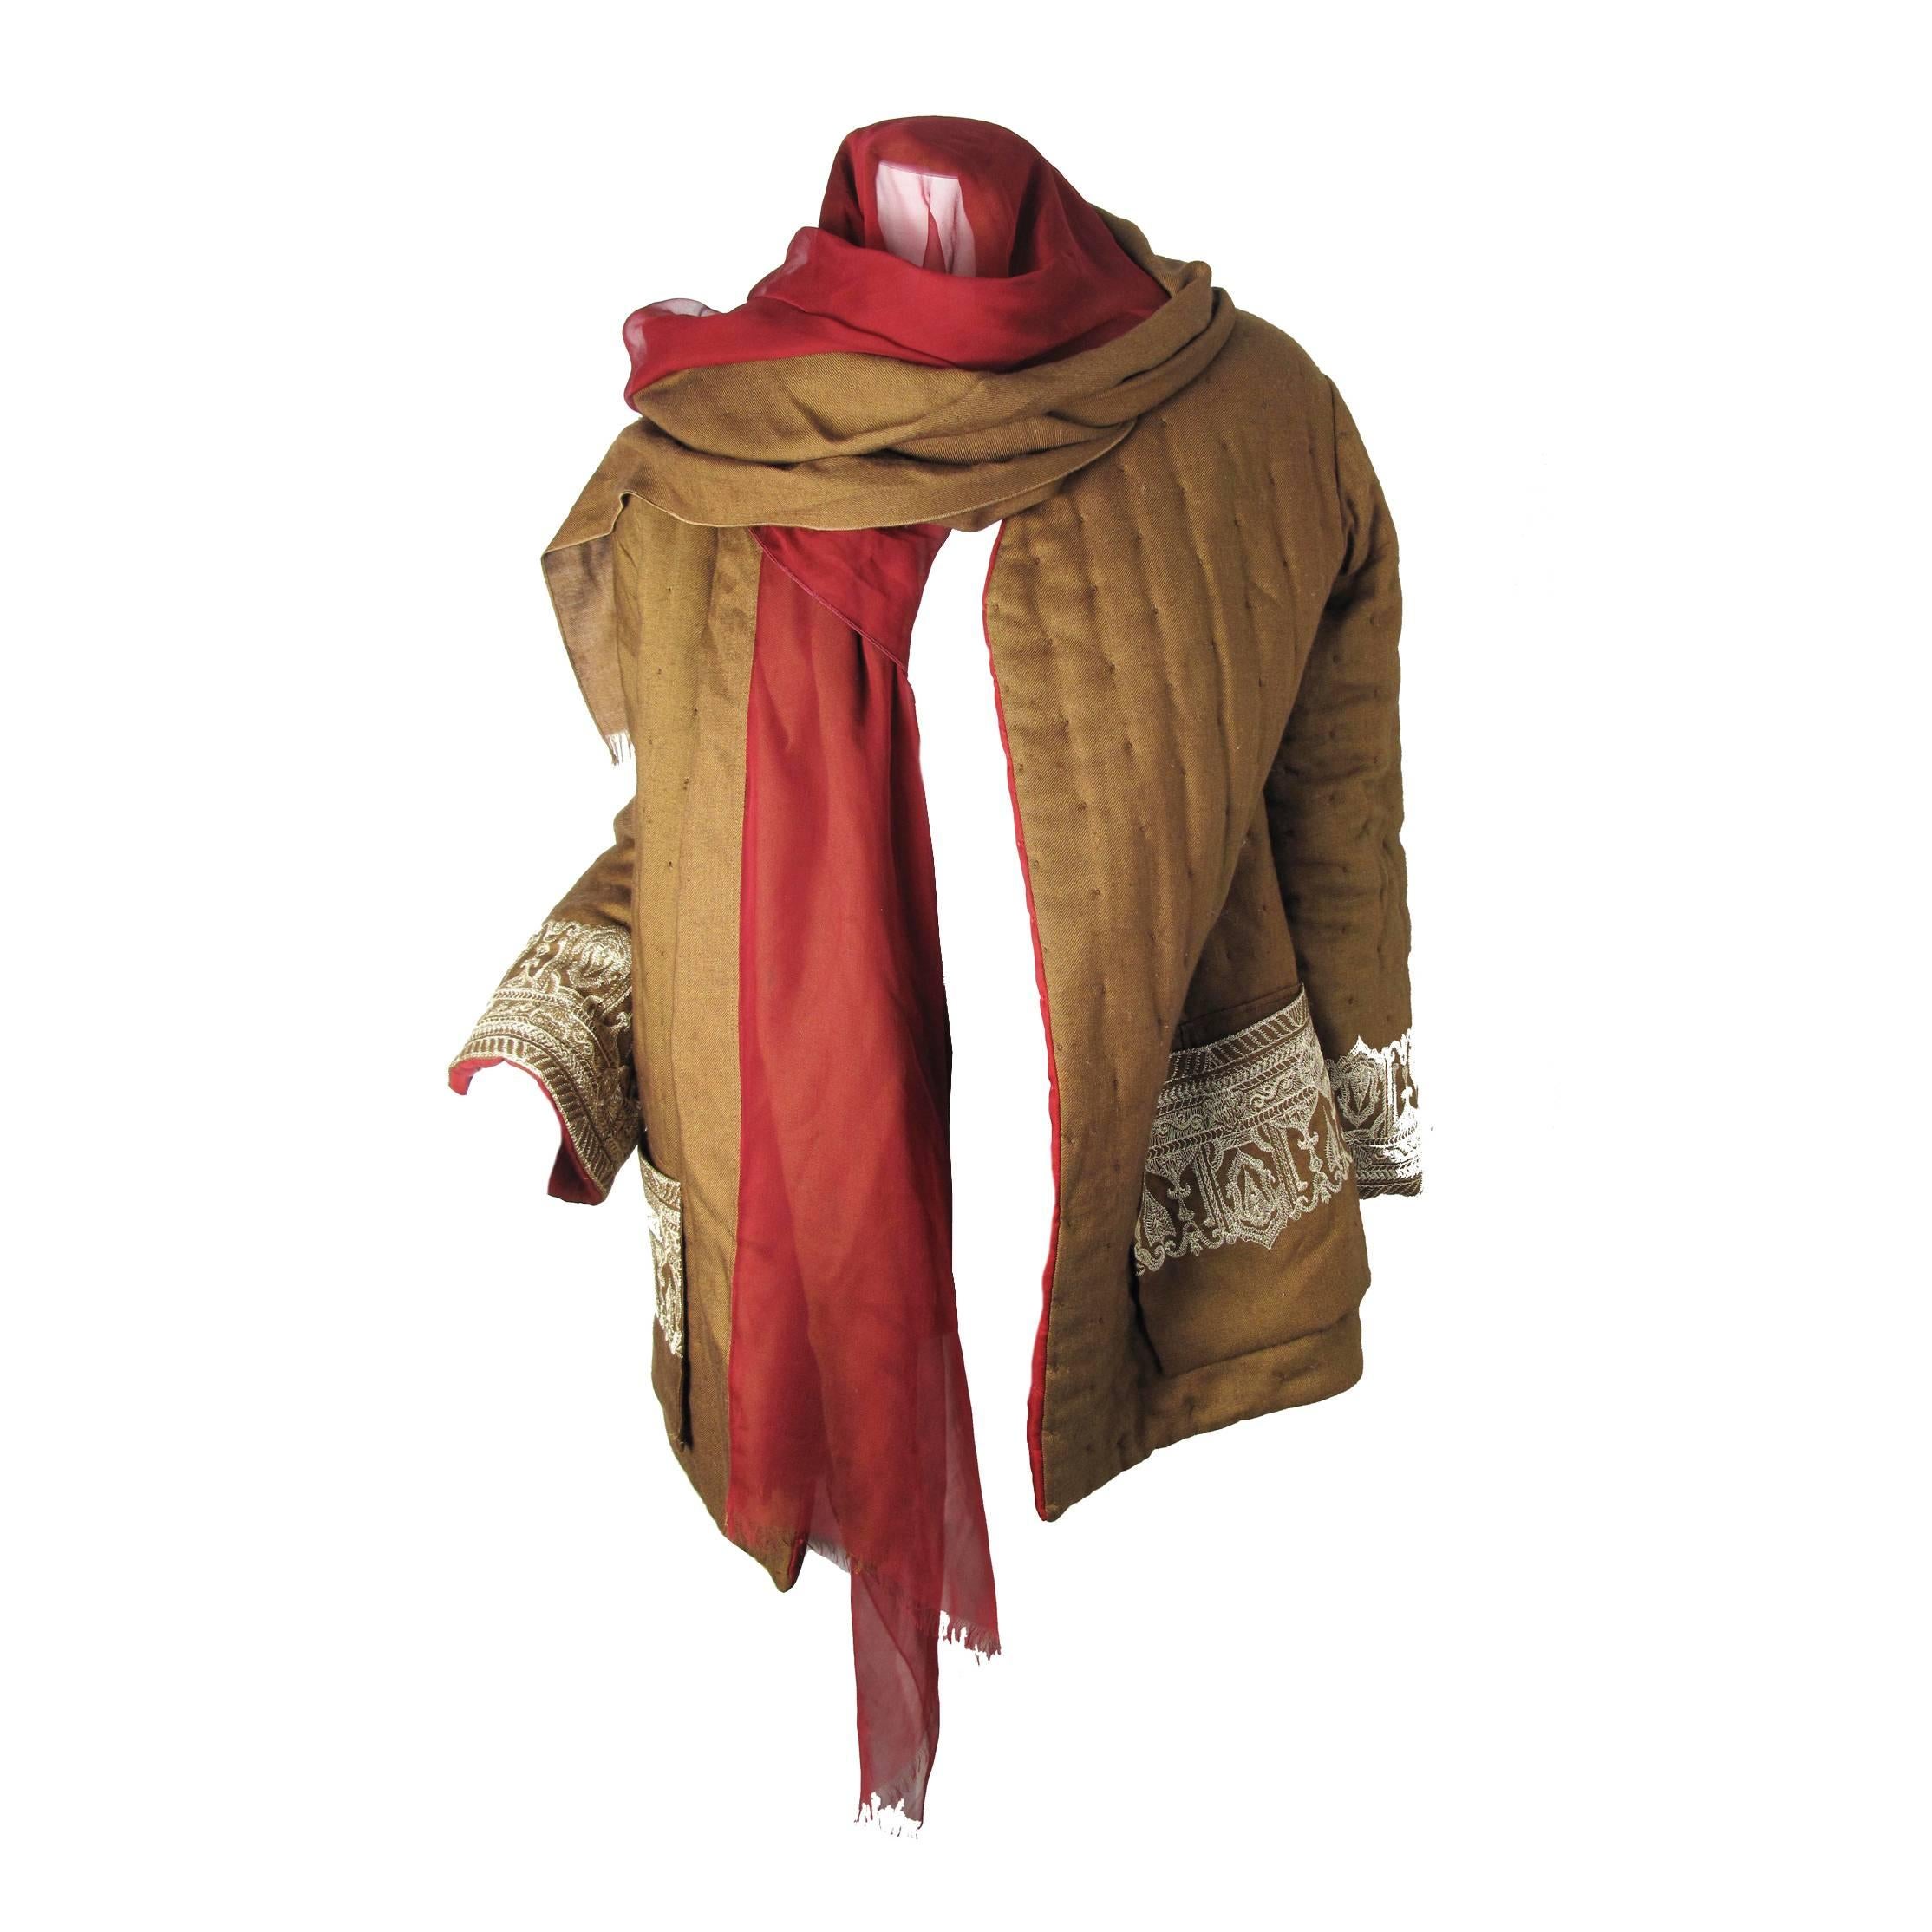 Gianfranco Ferre Reversible Coat with attached Scarf / Head Scarf  